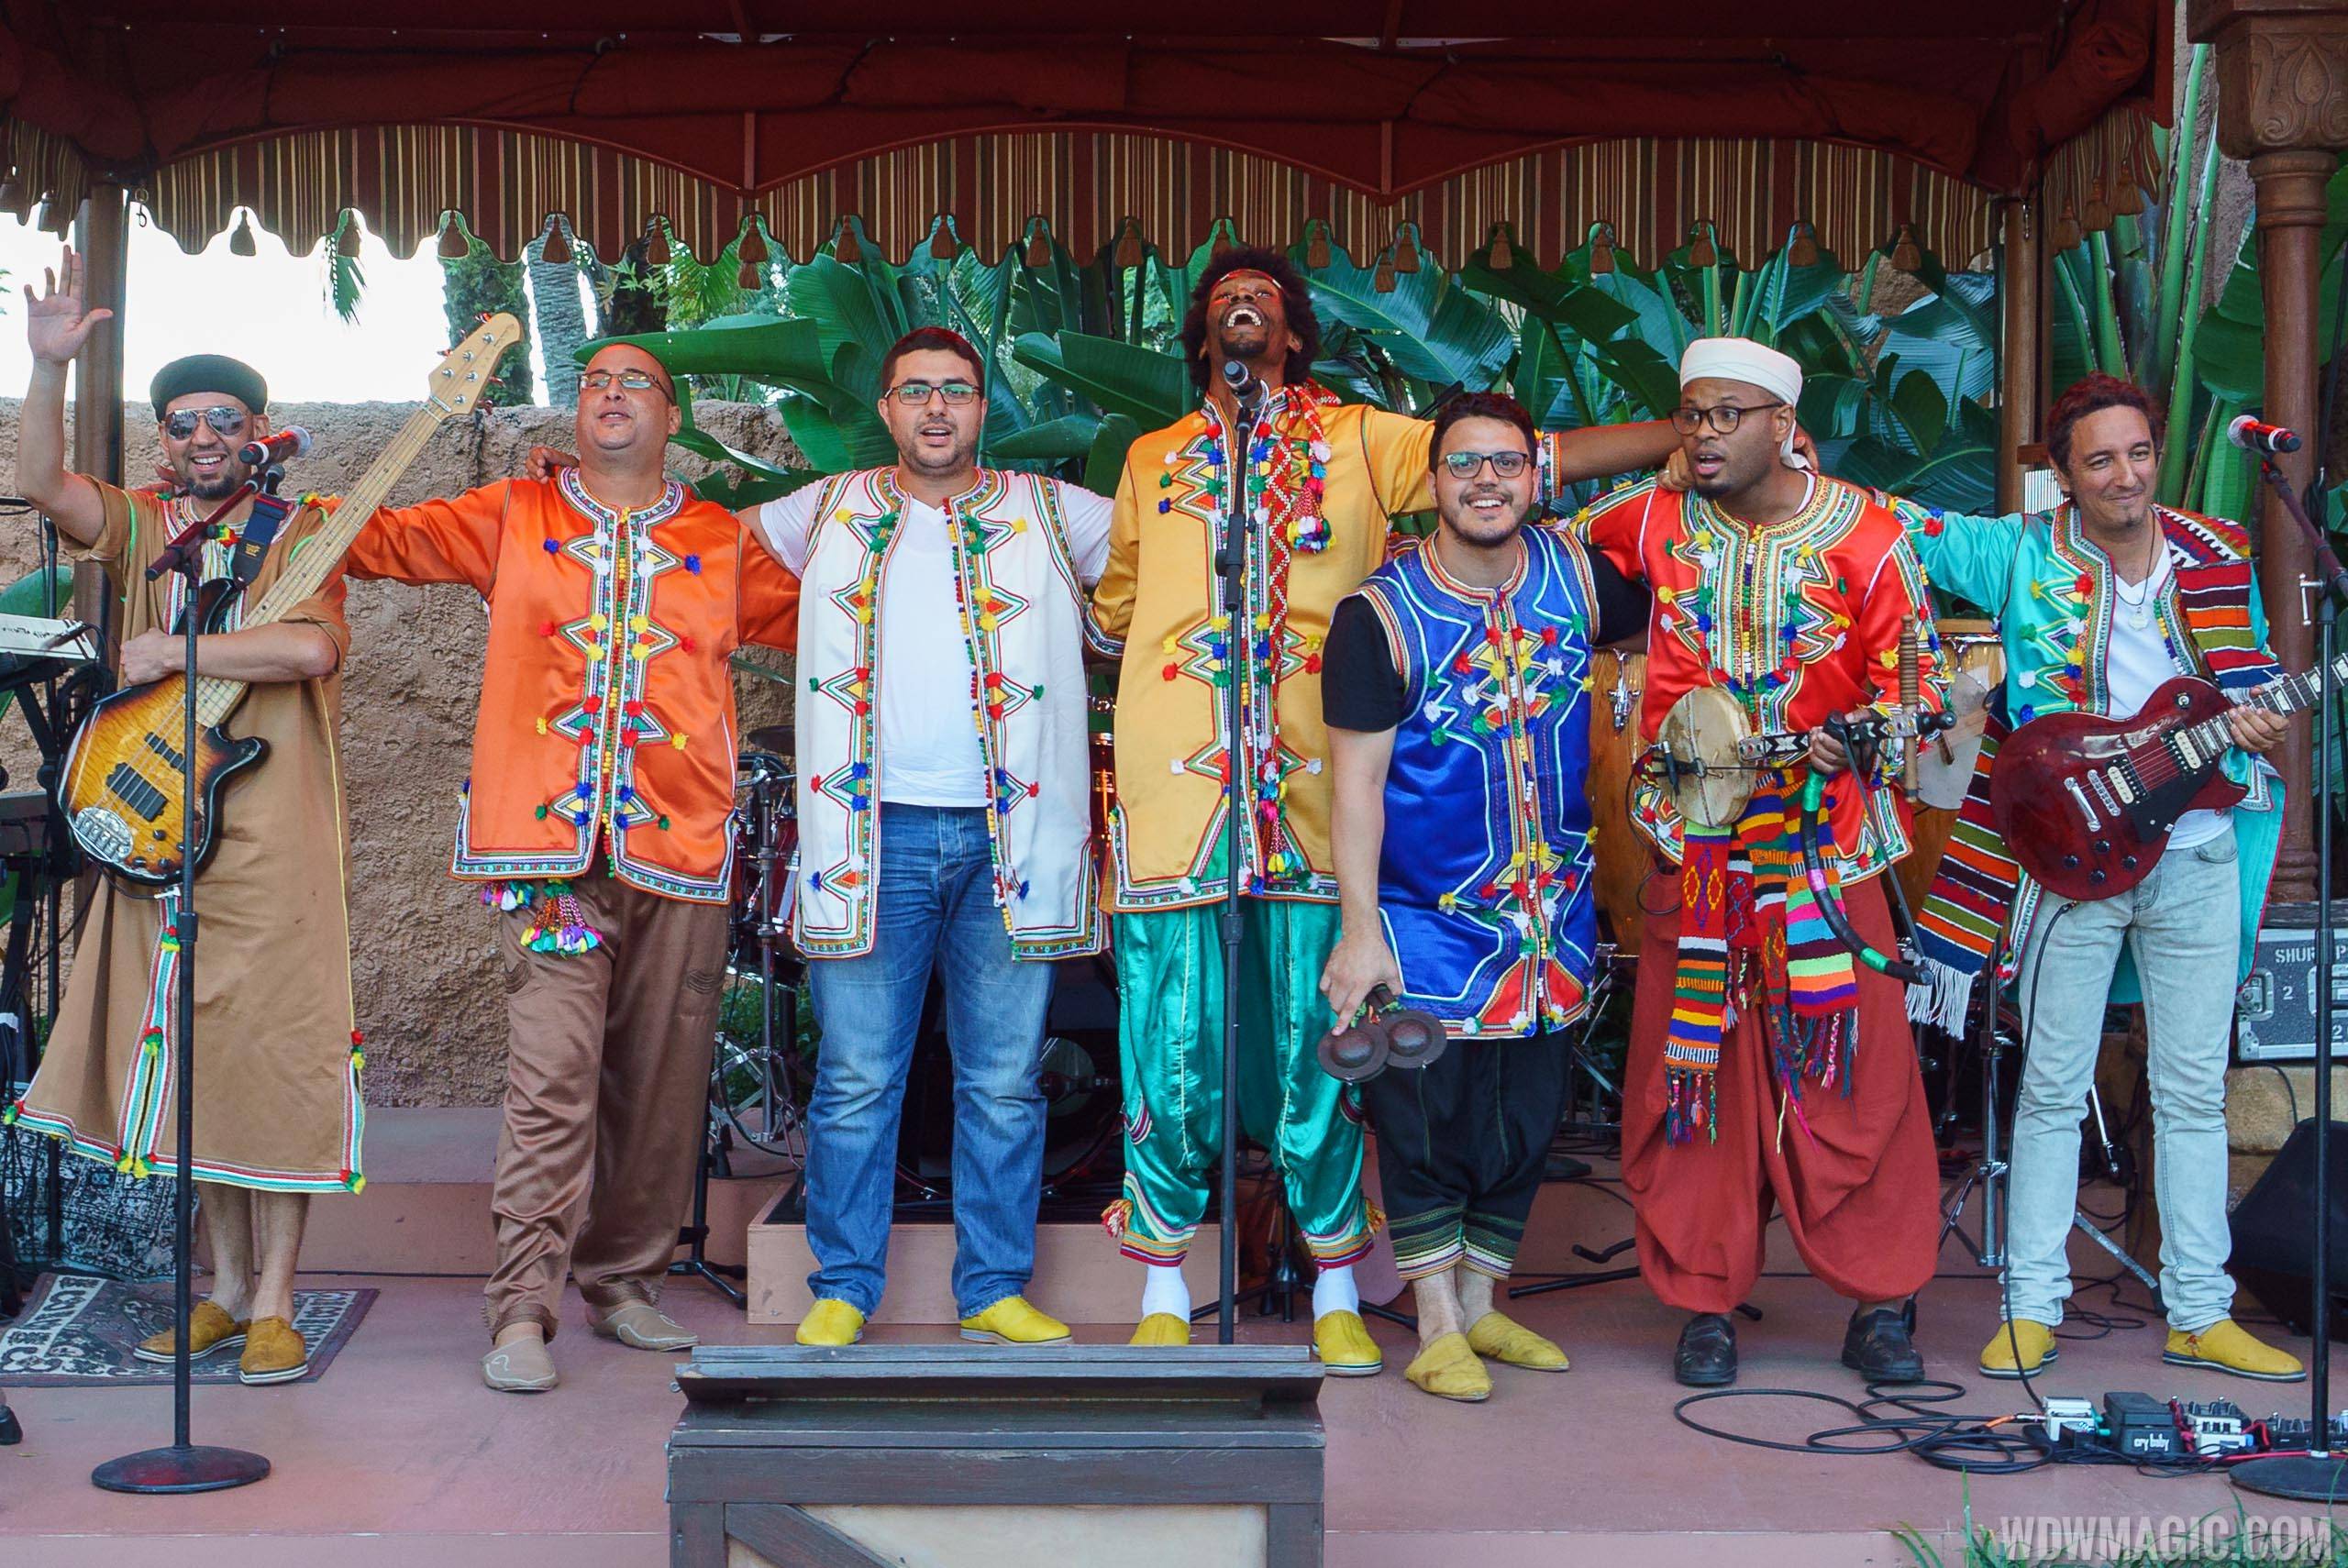 VIDEO - Ribab Fusion performs at Epcot's Morocco Pavilion